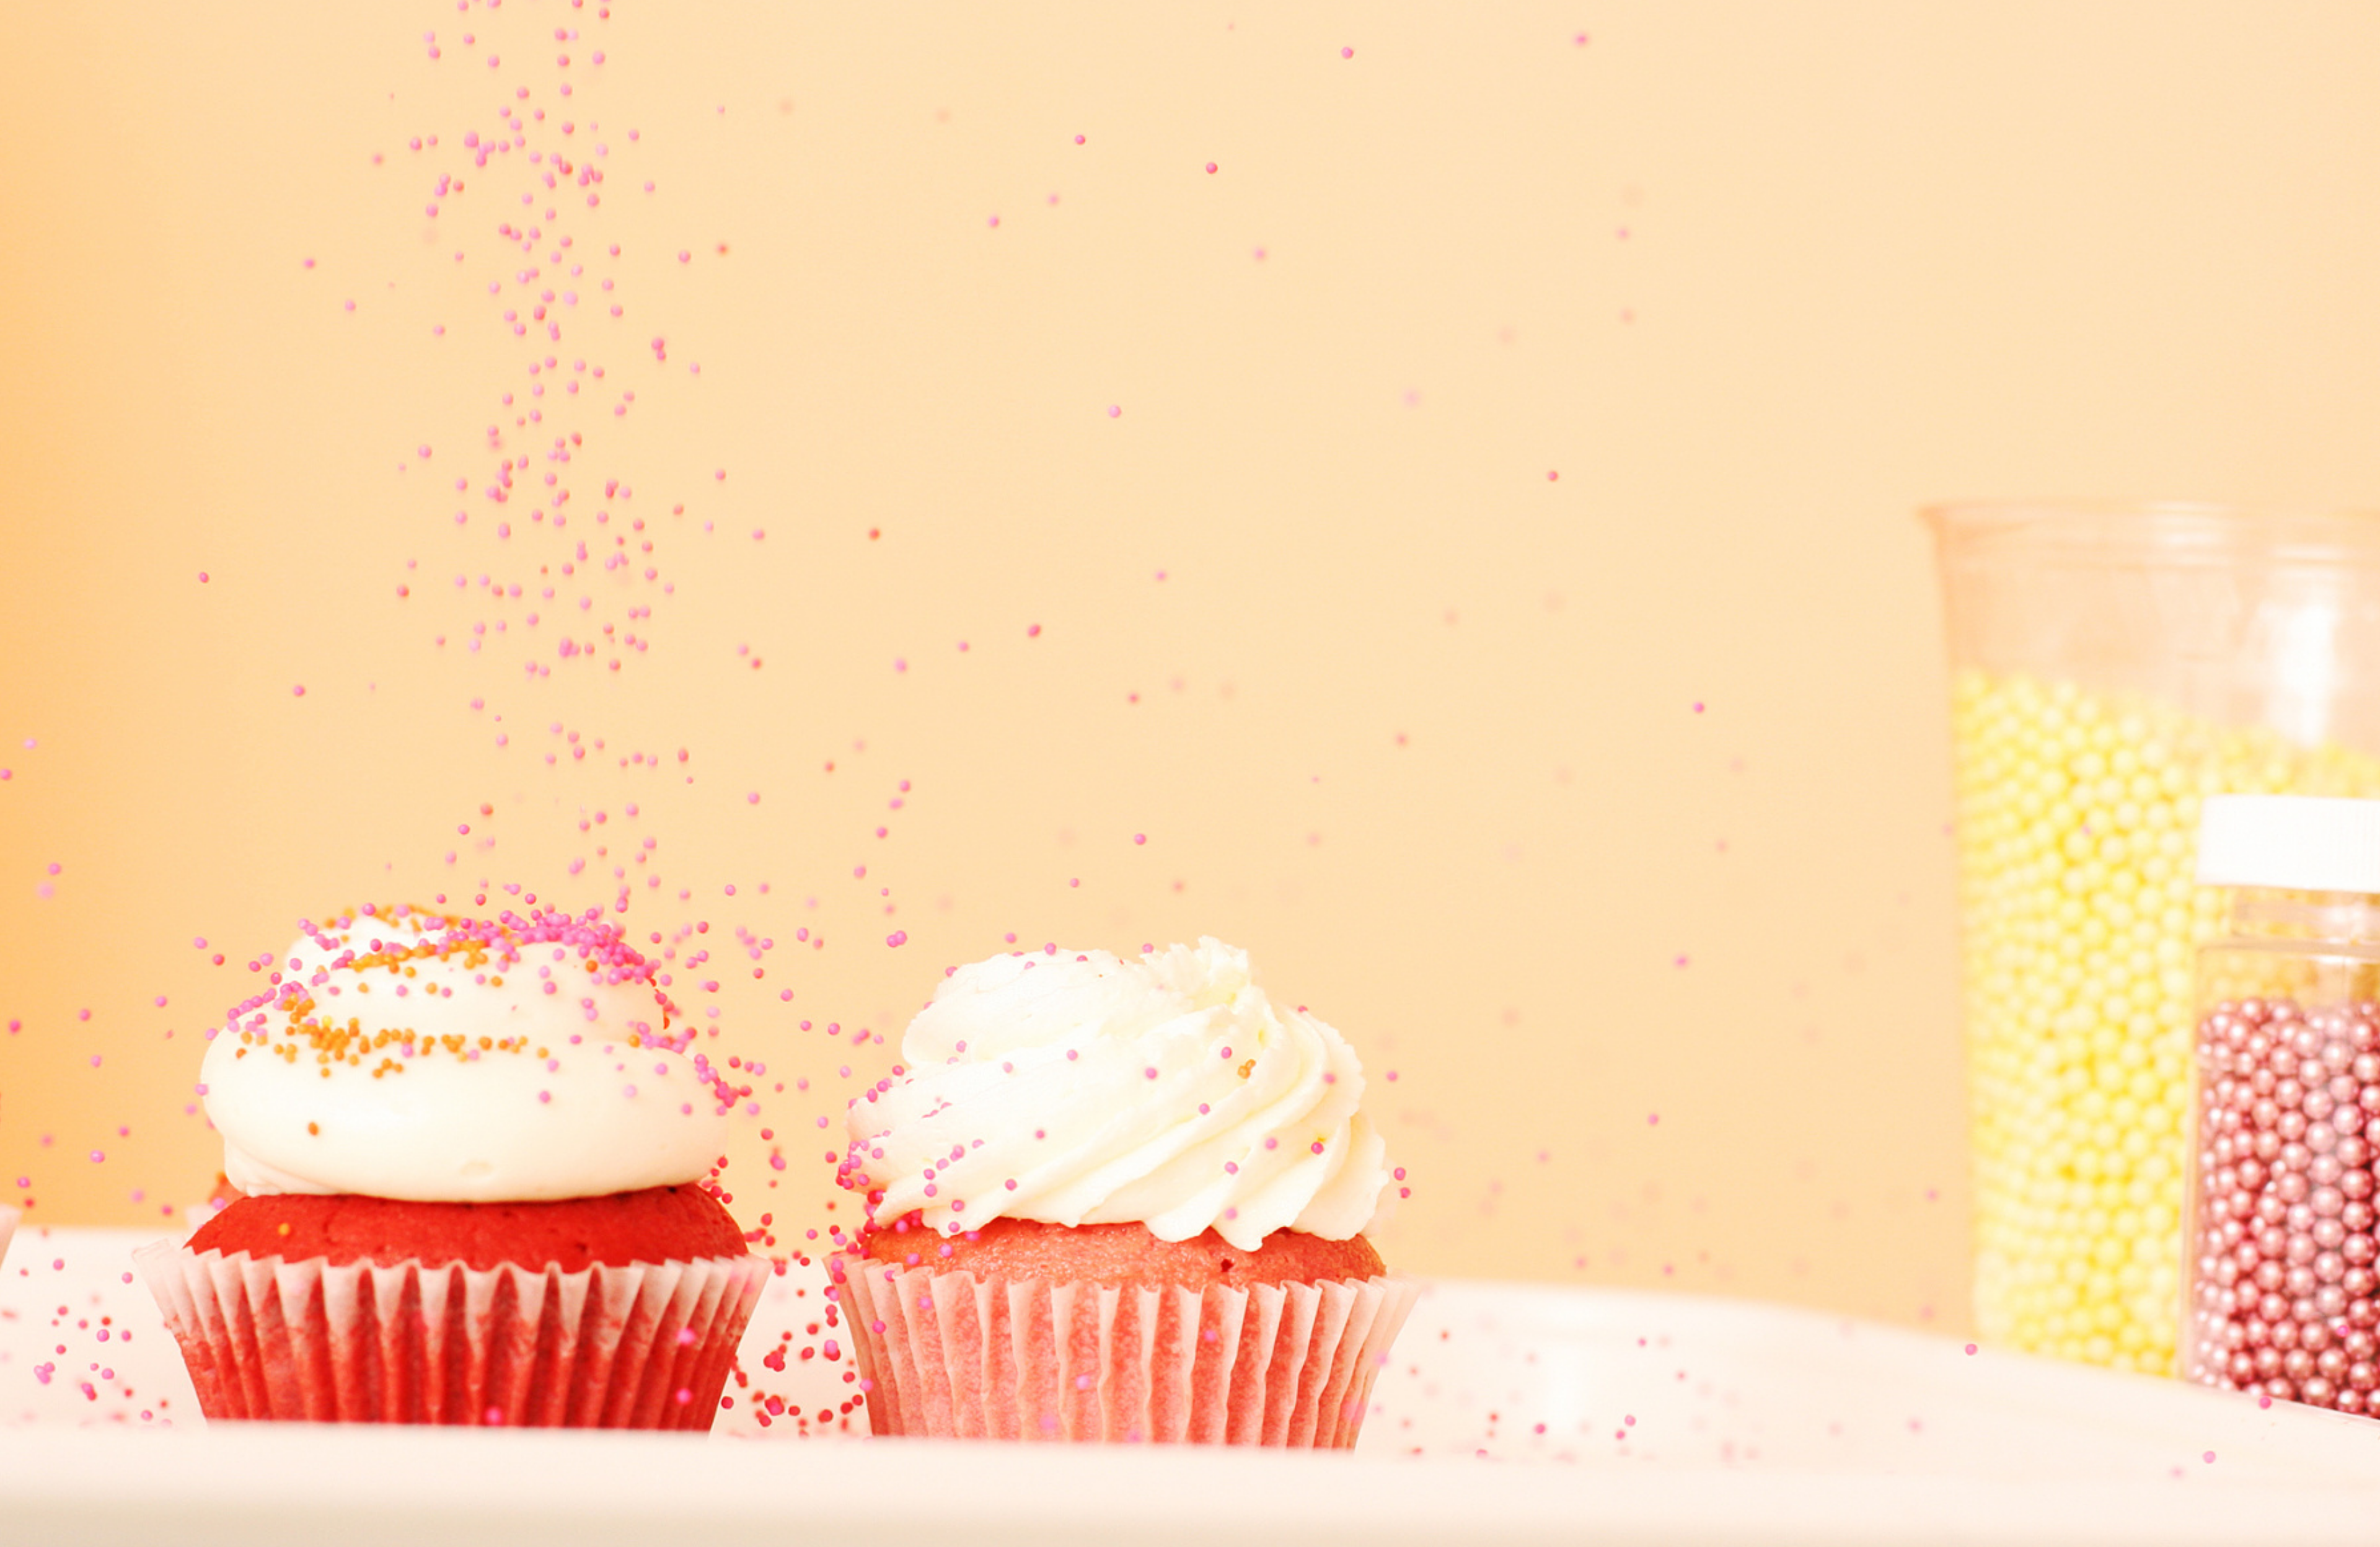 pink champagne and red velvet cupcakes